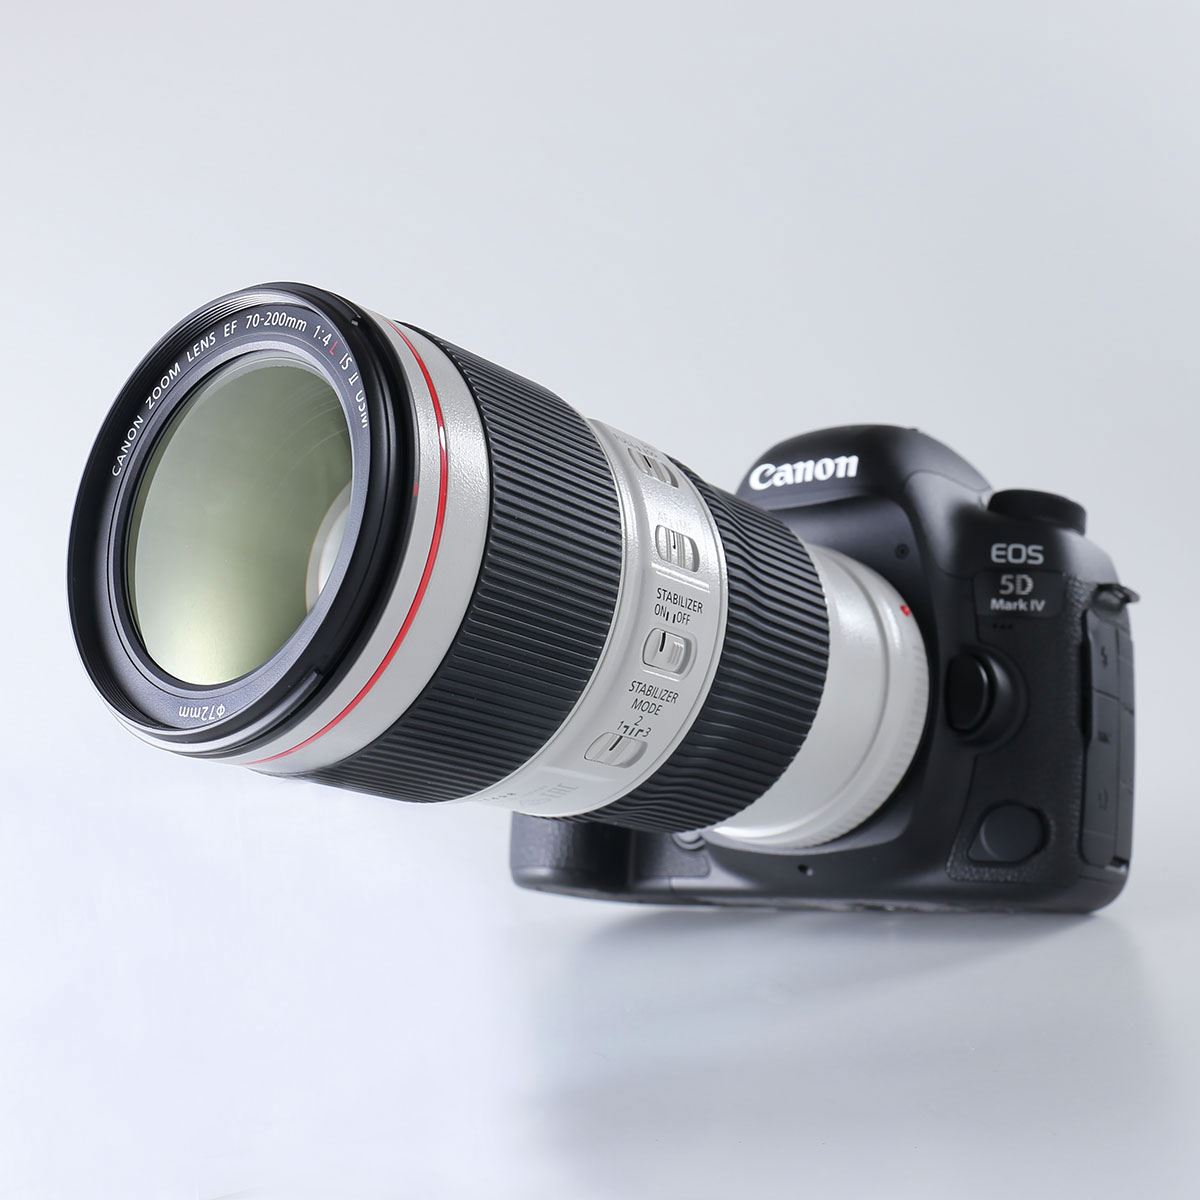 Canon　EF70-200mm f4L IS USM